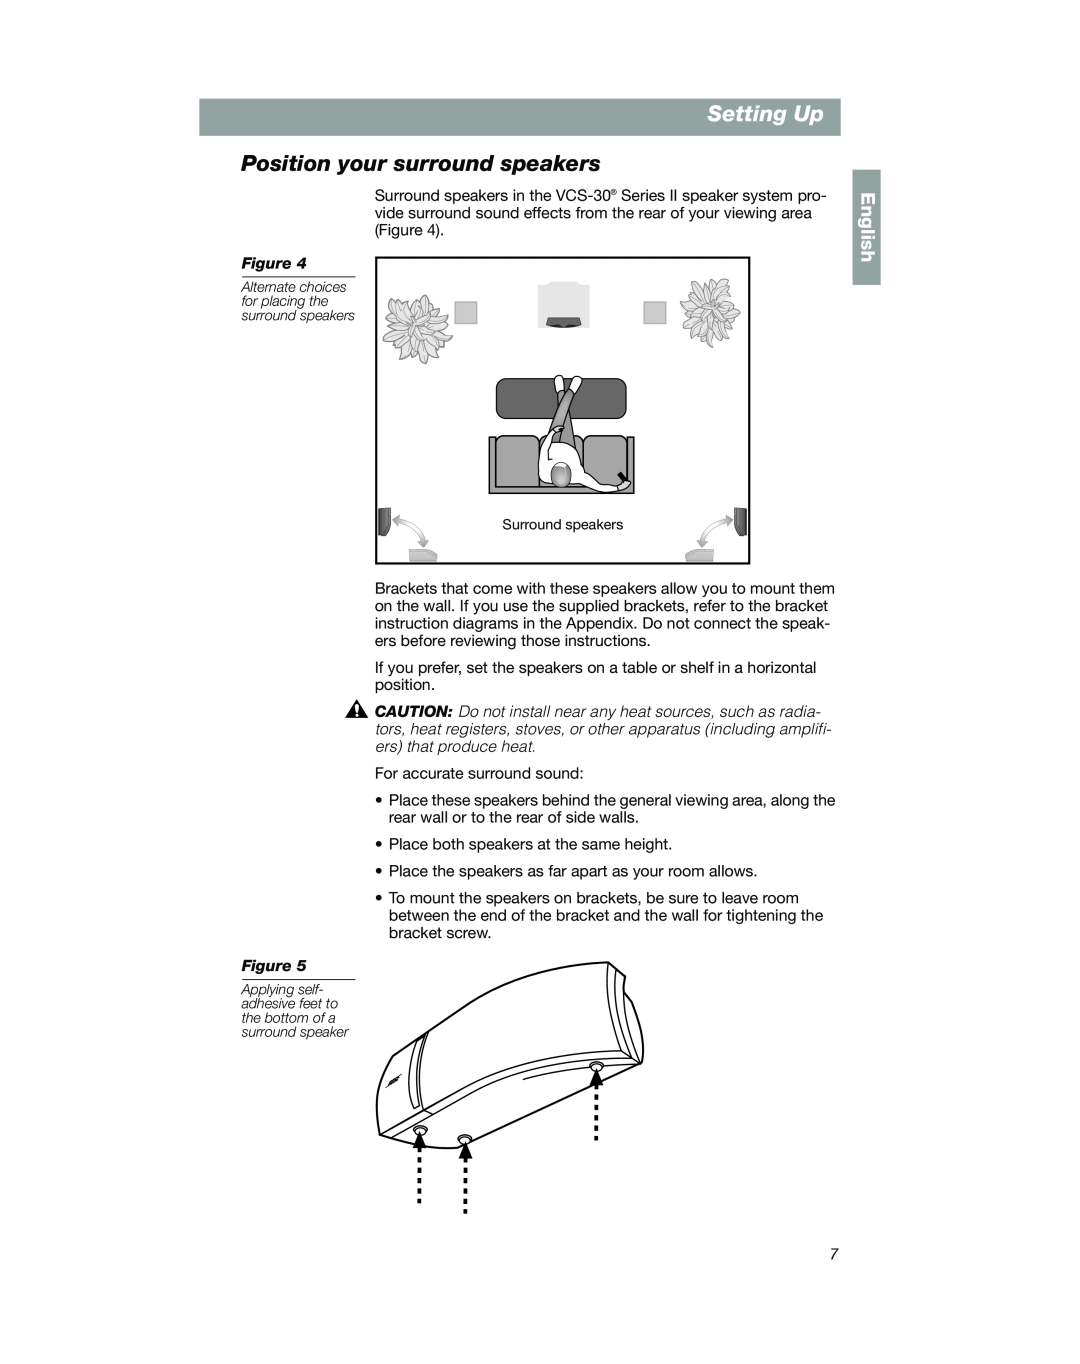 Bose VCS-10 manual Position your surround speakers, Setting Up, English 